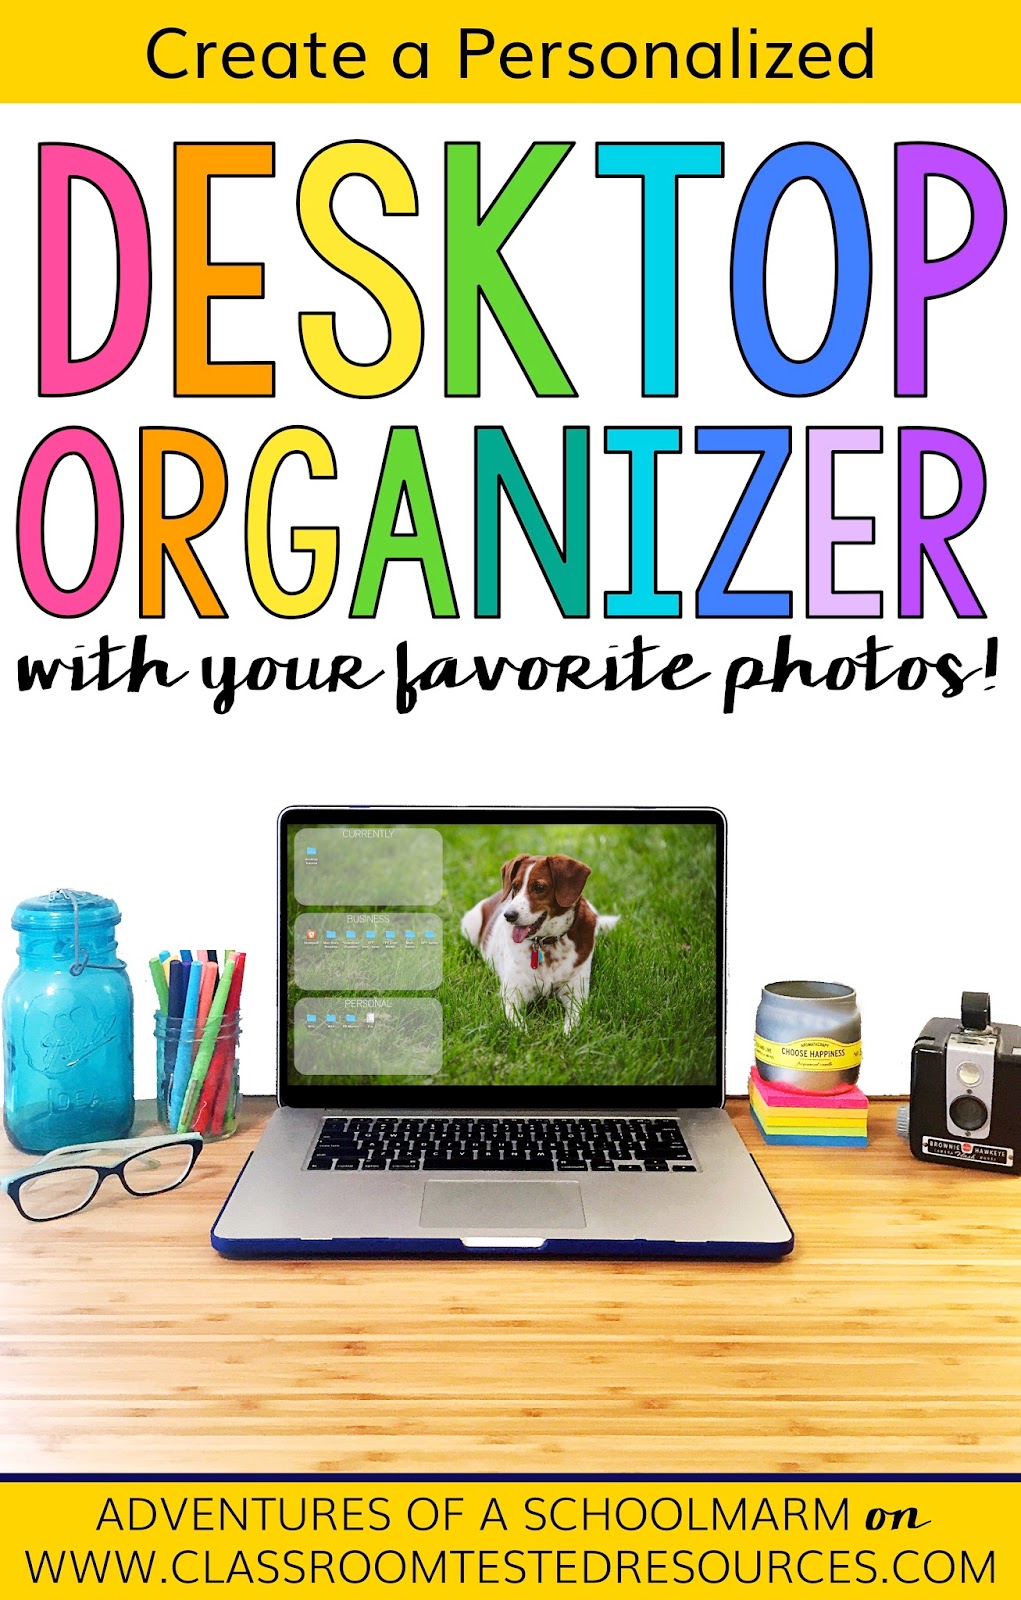 Learn How To Make A Personalized Desktop Organizer - Netbook - HD Wallpaper 